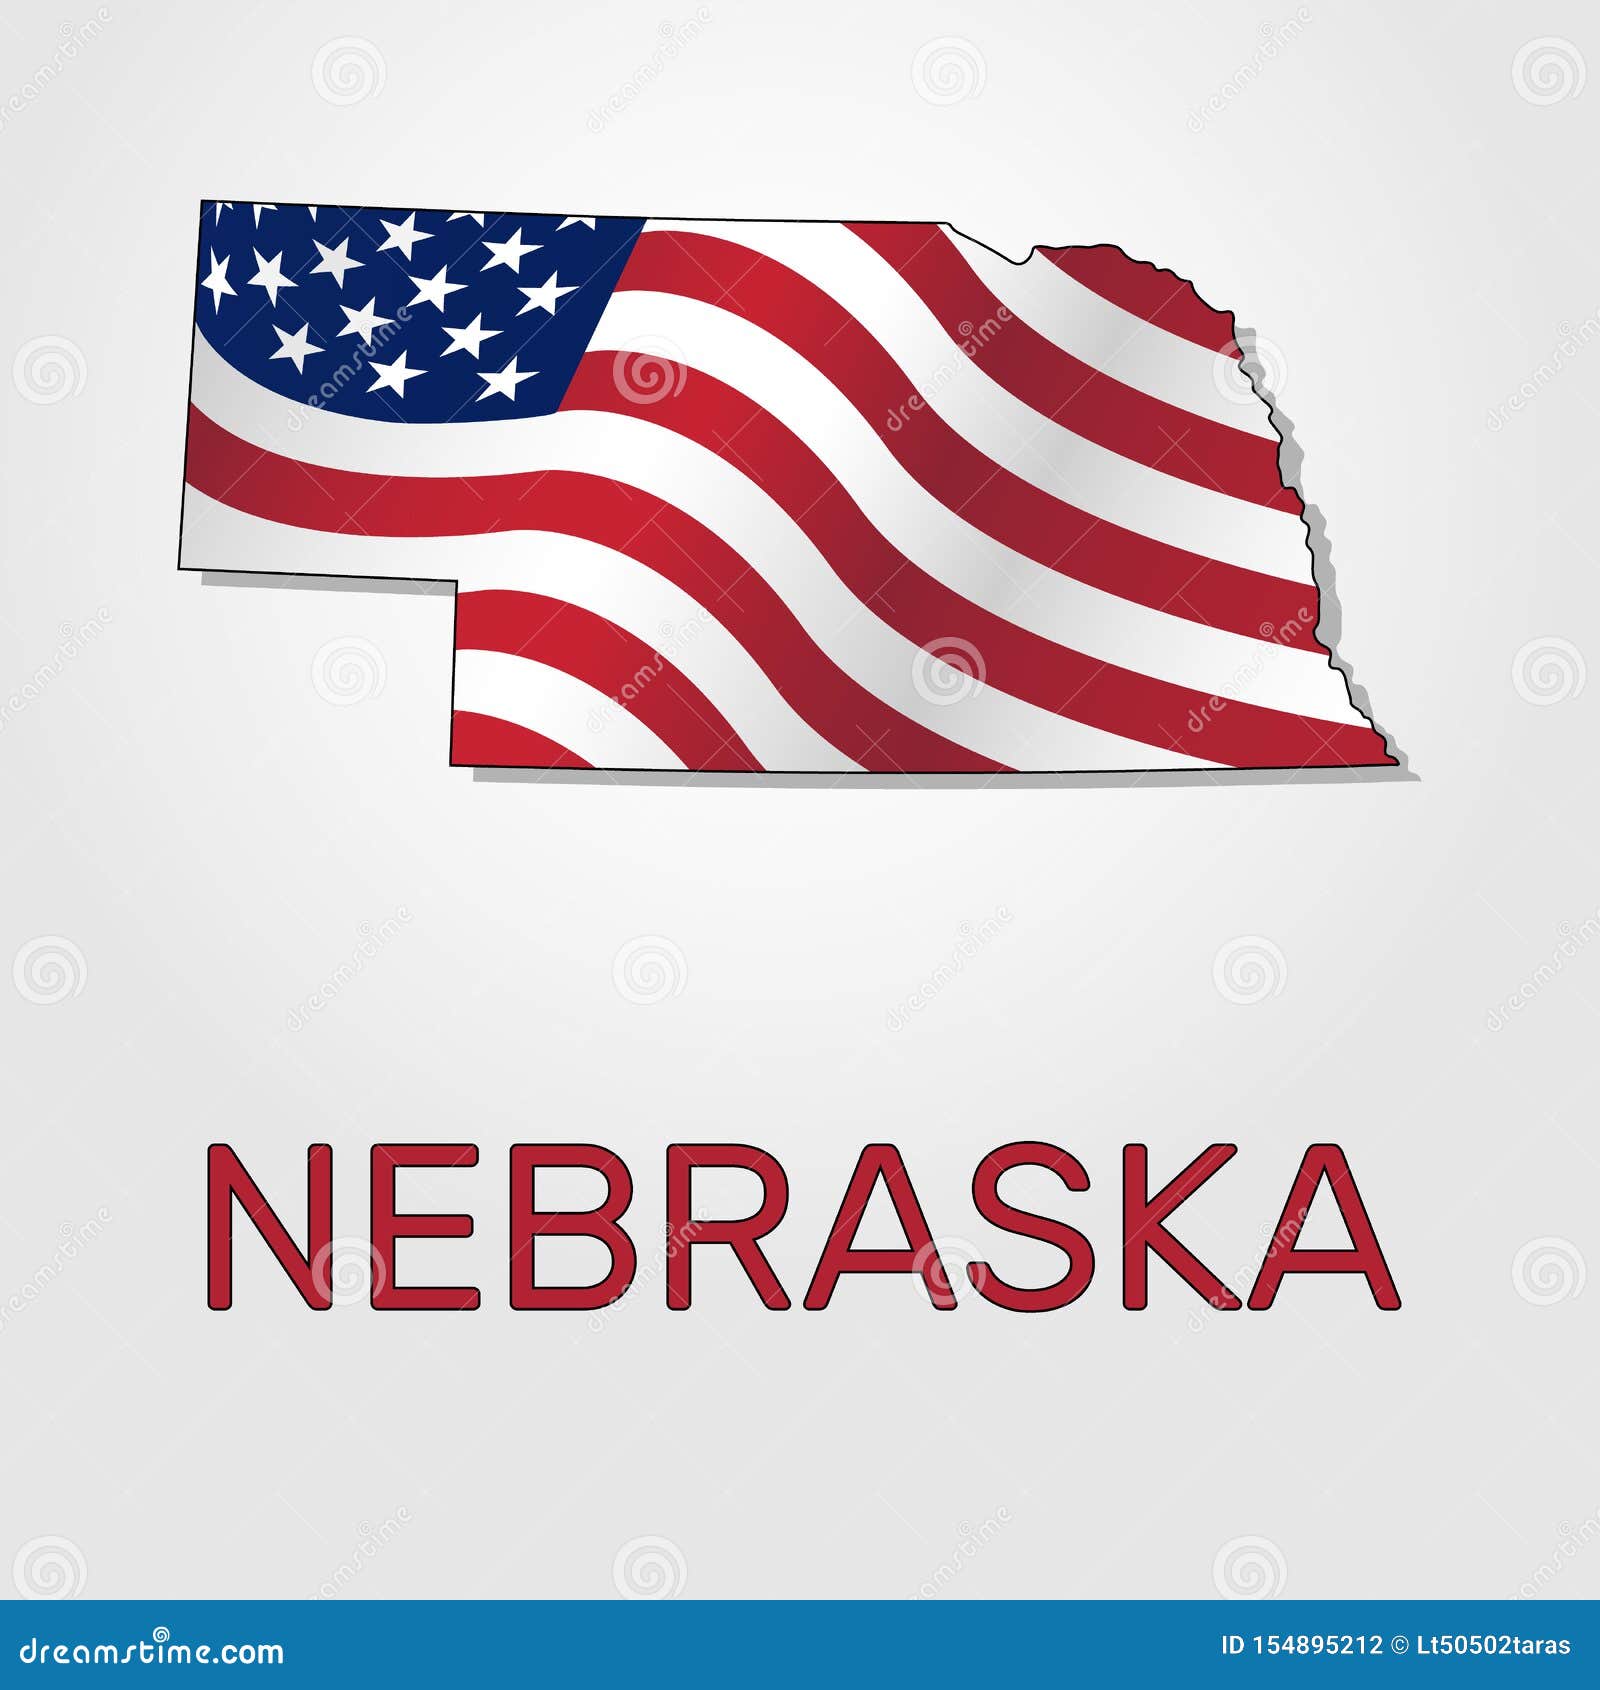 Map Of The State Of Nebraska In Combination With A Waving The Flag Of